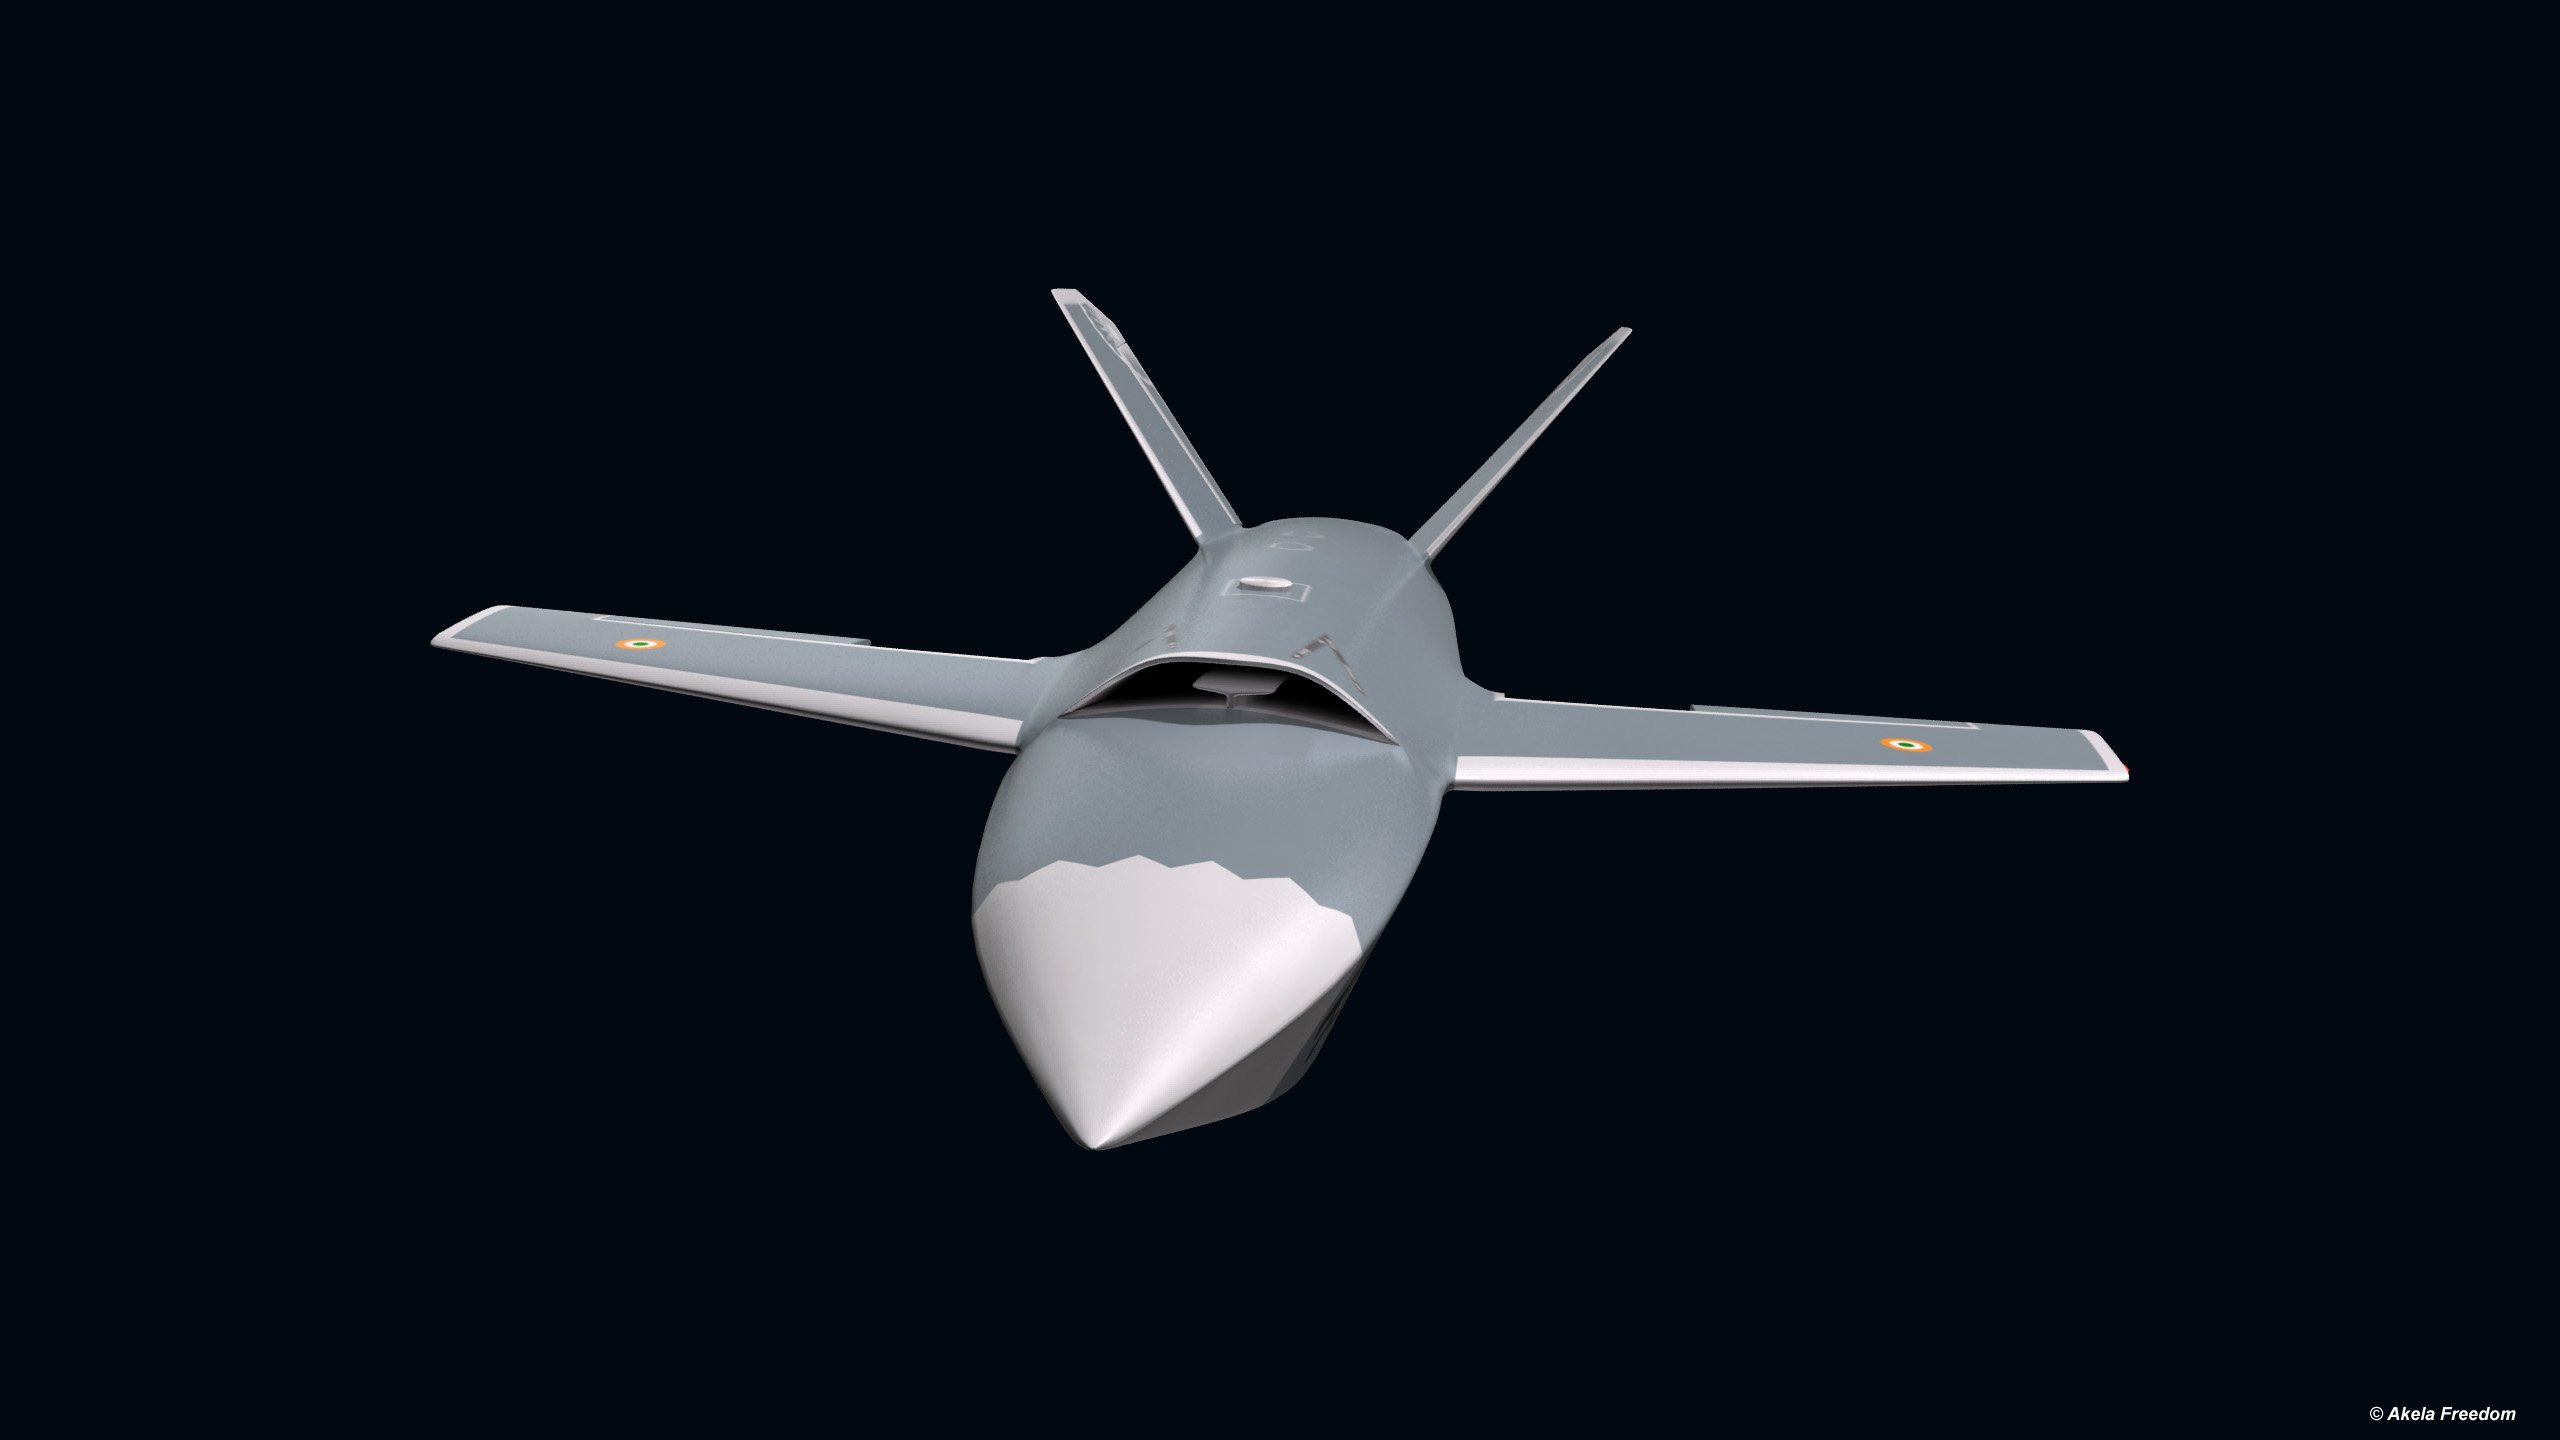 Indian Aerospace Defence News - IADN on X: #HAL is planning to build a  larger variant of CATS Warrior drone for Fighter-Bomber role. CATS Warrior  2 will have double the payload 